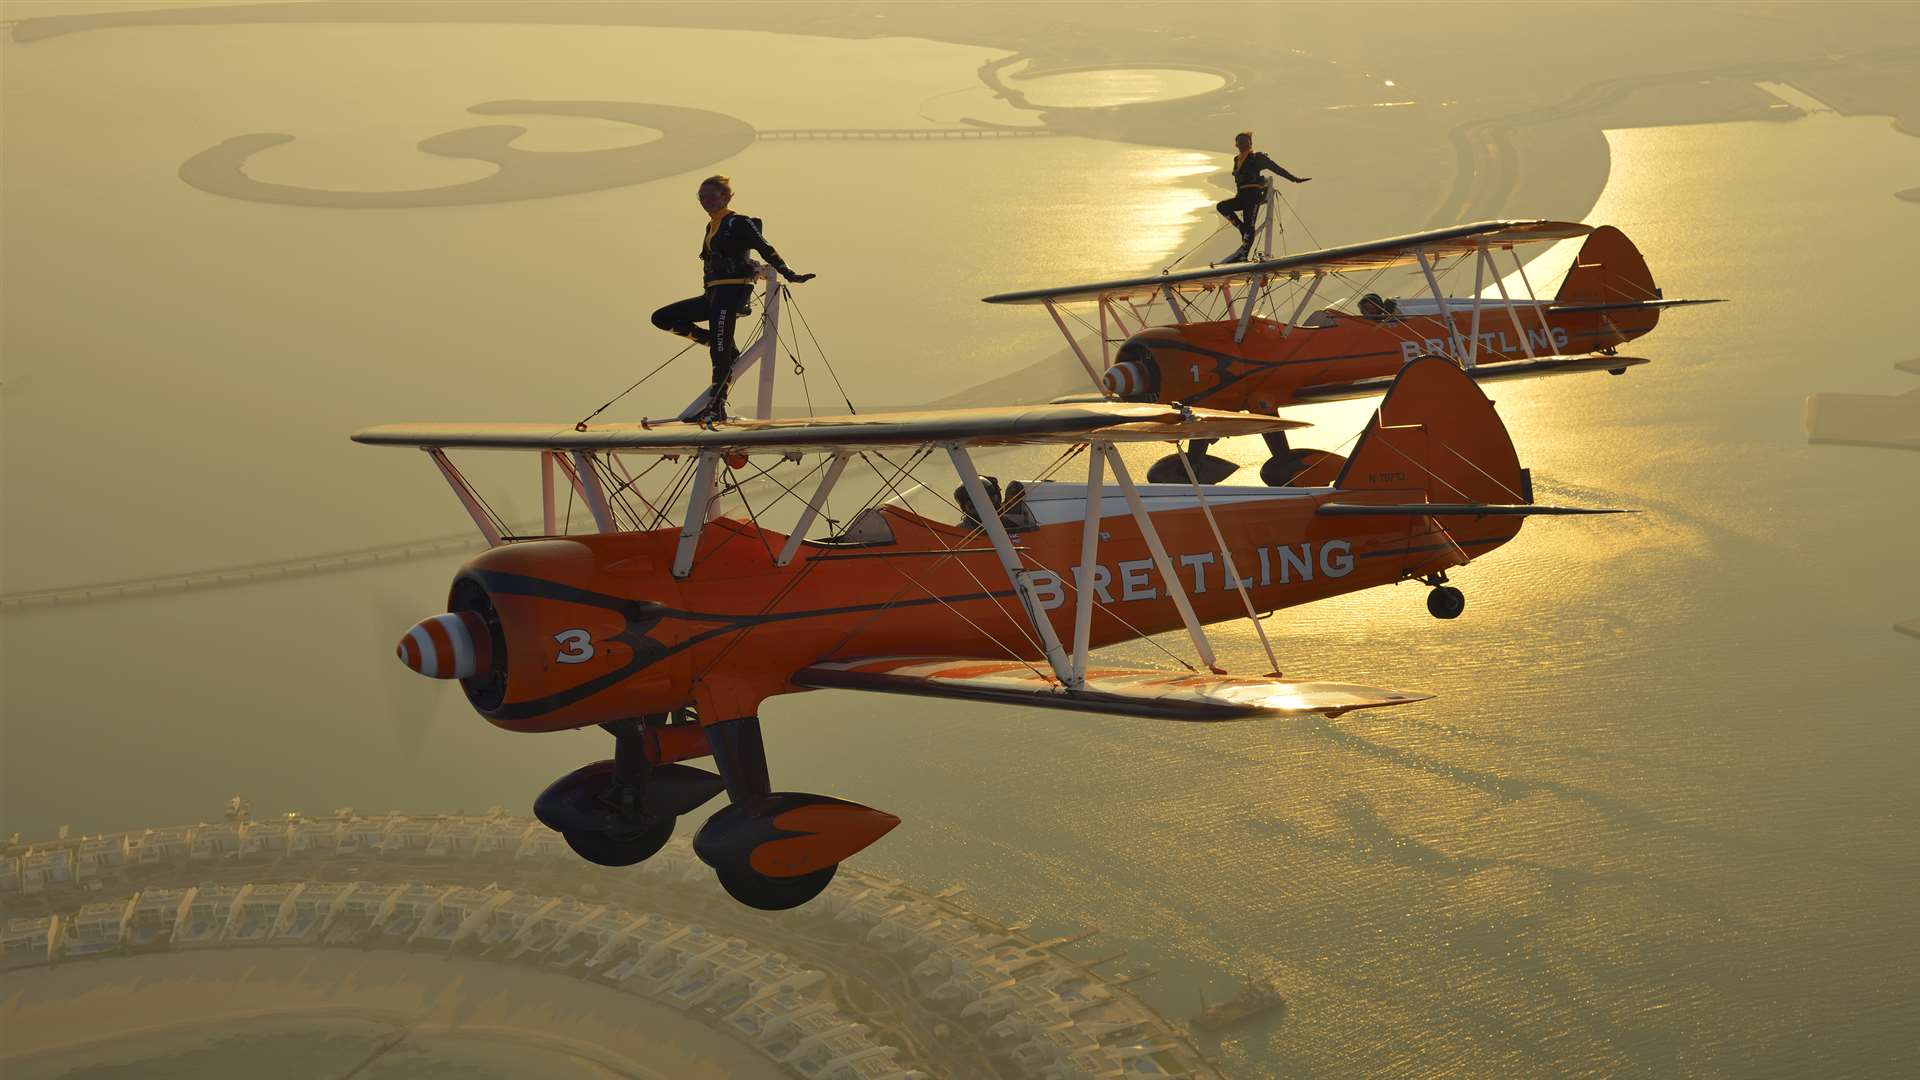 The daring wingwalkers of the world famous Breitling Wingwalking team